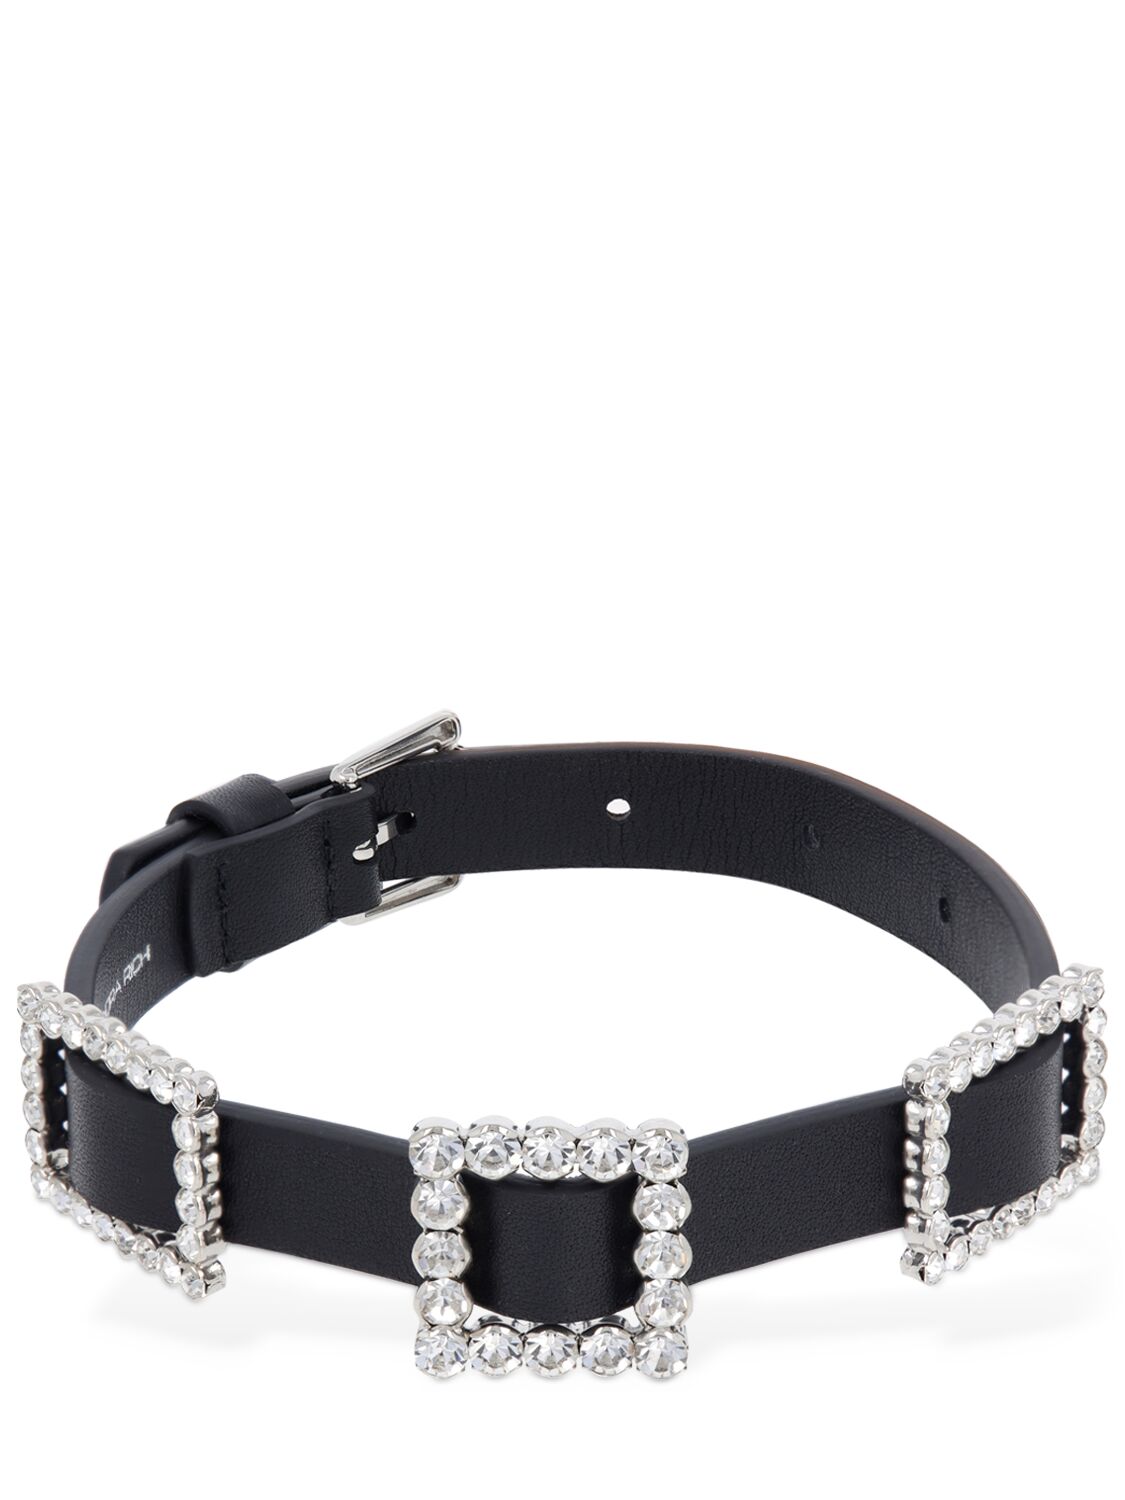 Alessandra Rich Leather Choker W/ Crystal Buckles In Black